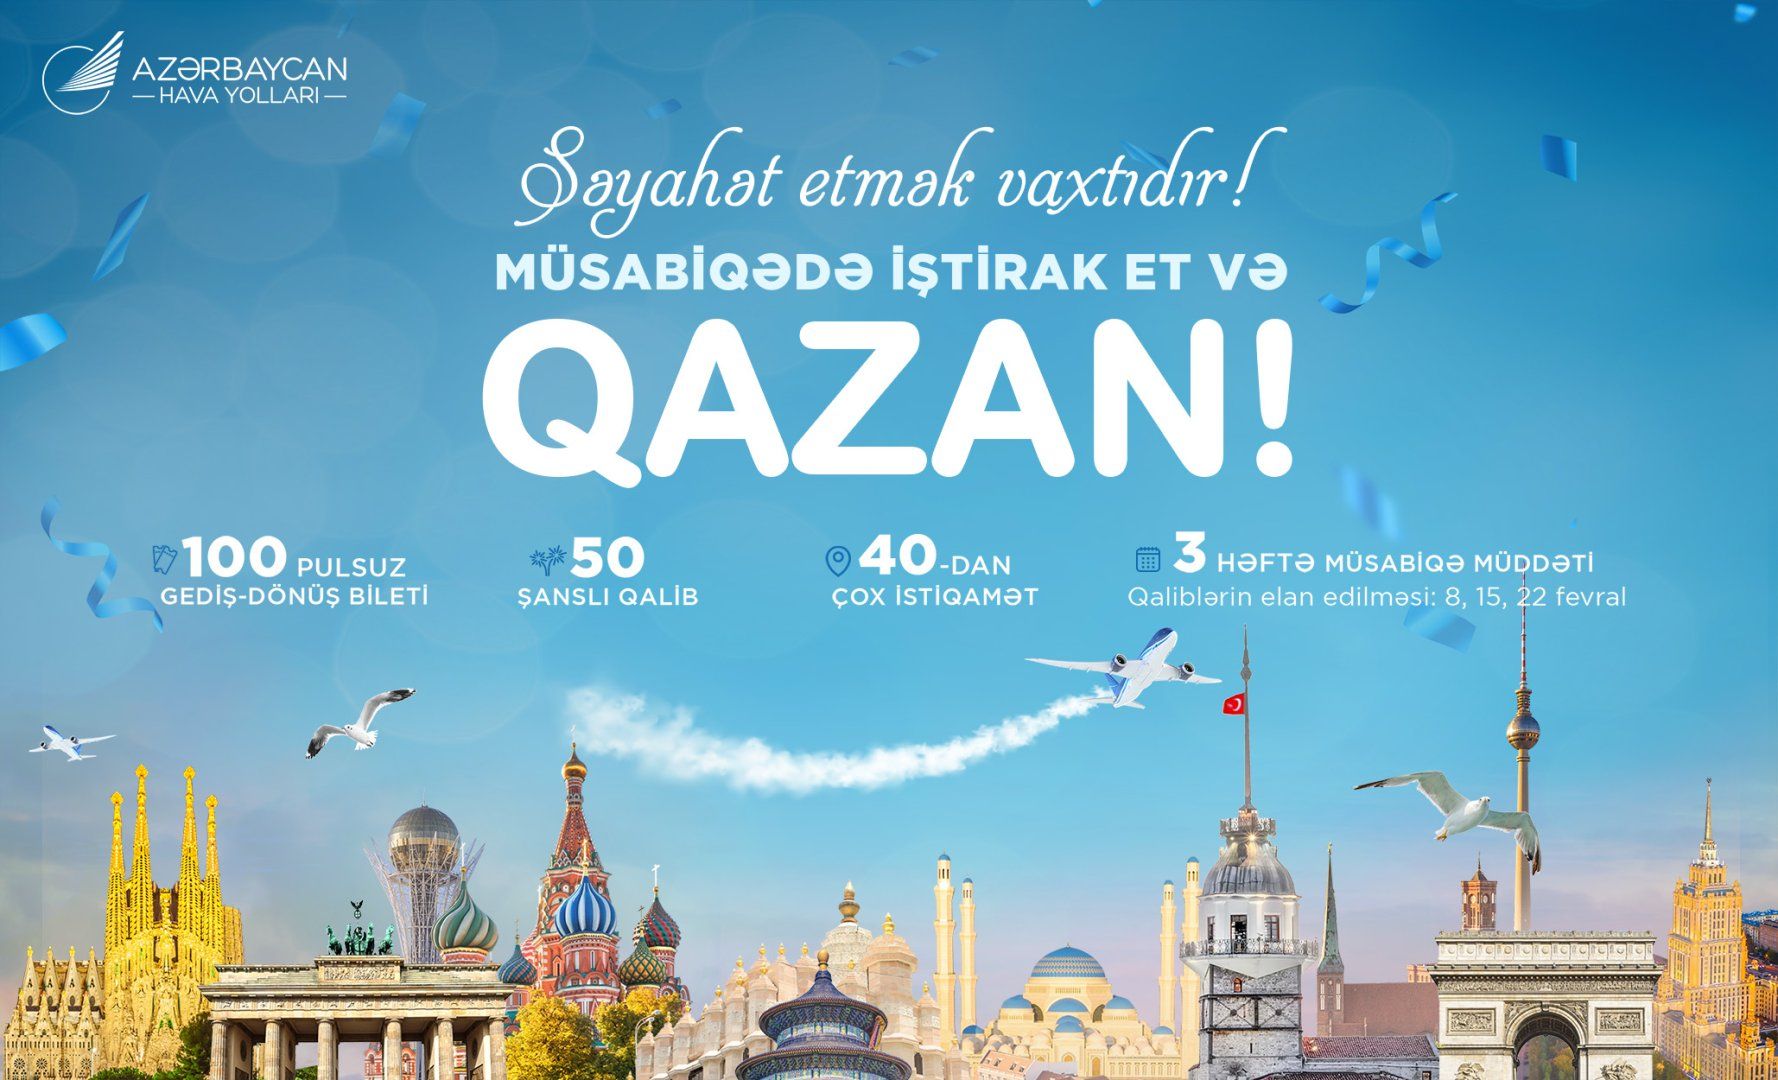 Free travel opportunity: AZAL offers 100 free tickets